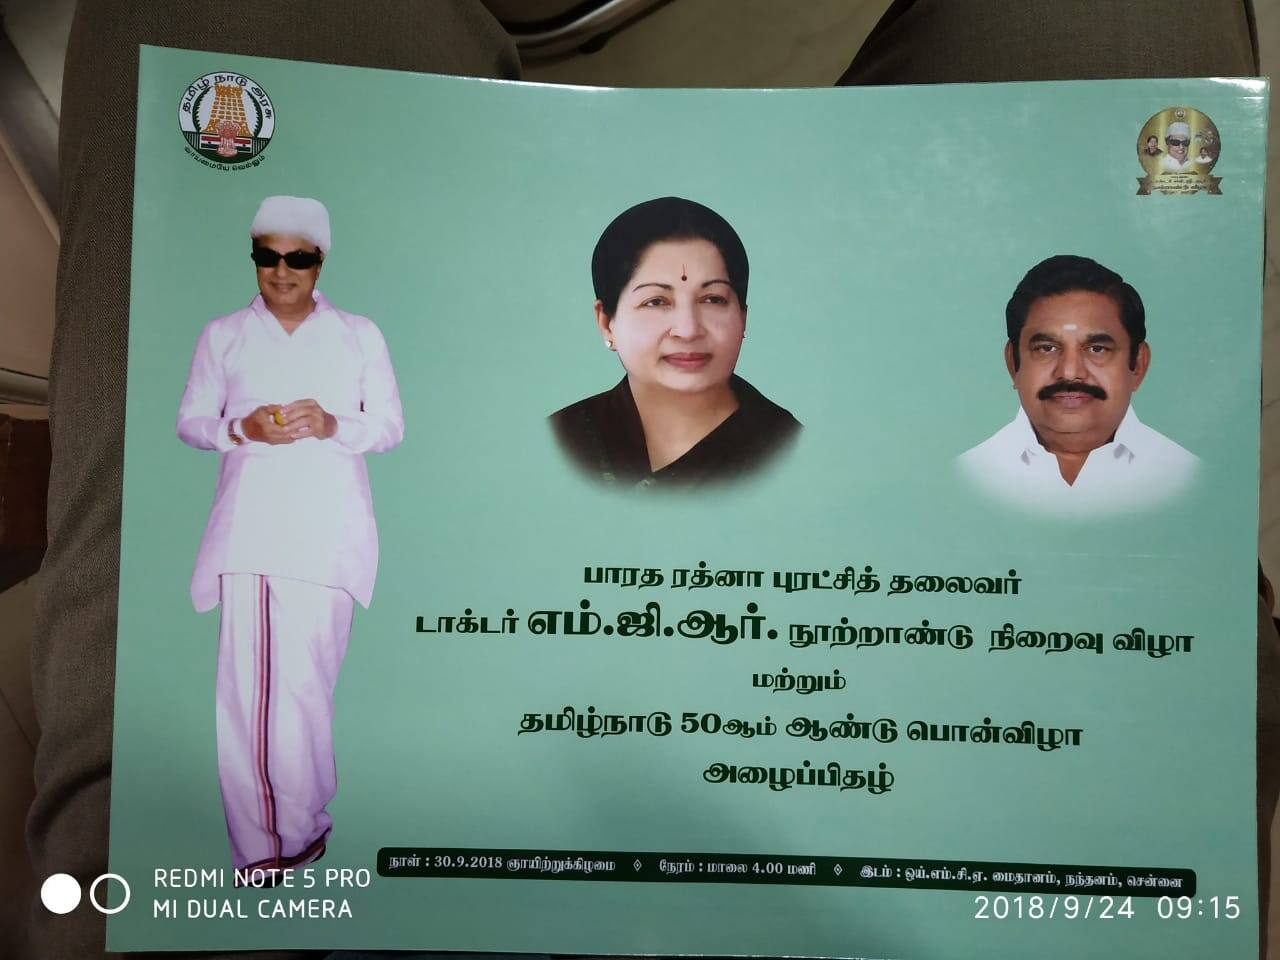 will not attend MGR century function